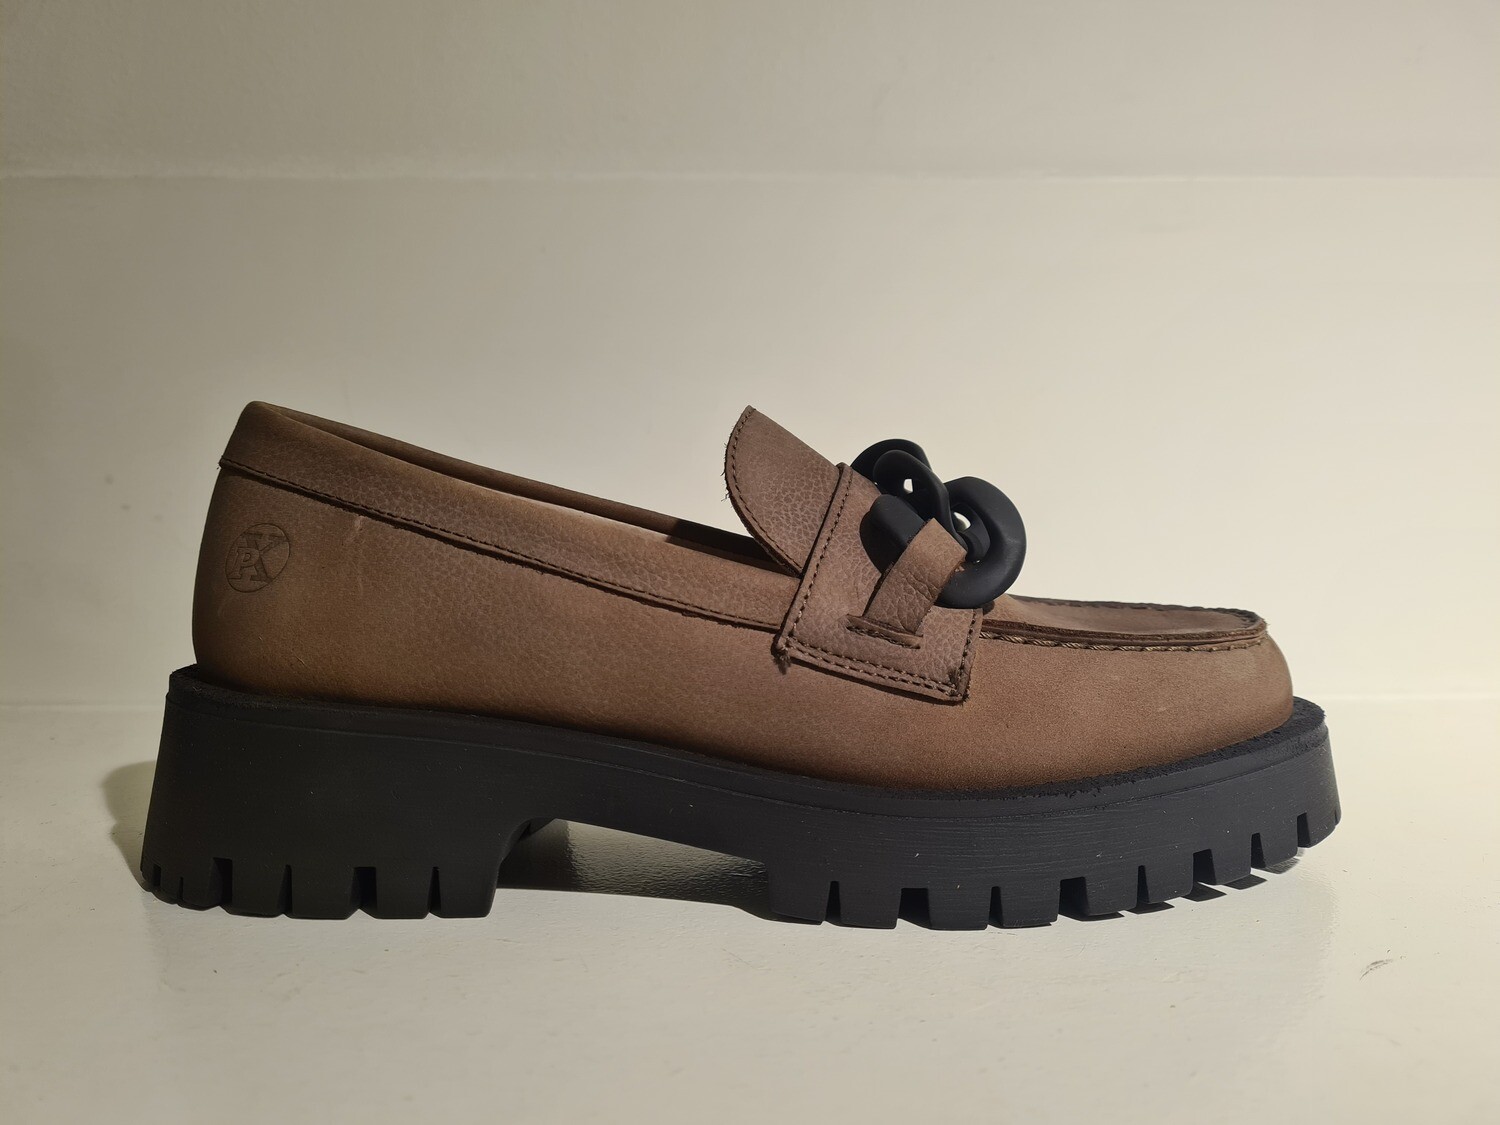 Post Xchange Chuncky Loafer / Fiola 04 taupe